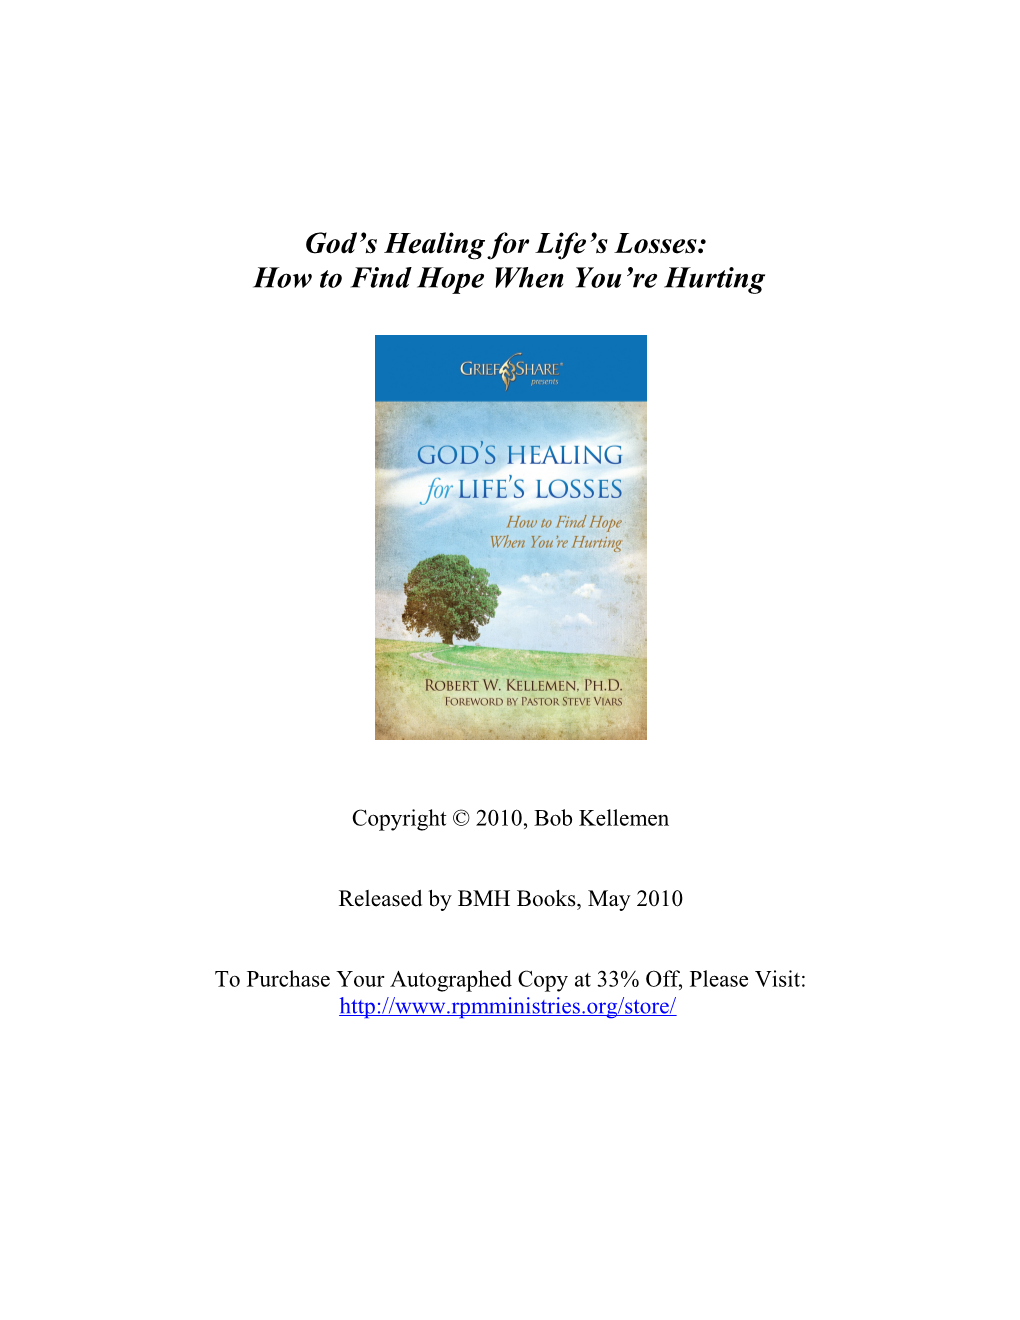 From God S Healing for Life S Losses: How to Find Hope When You Re Hurting